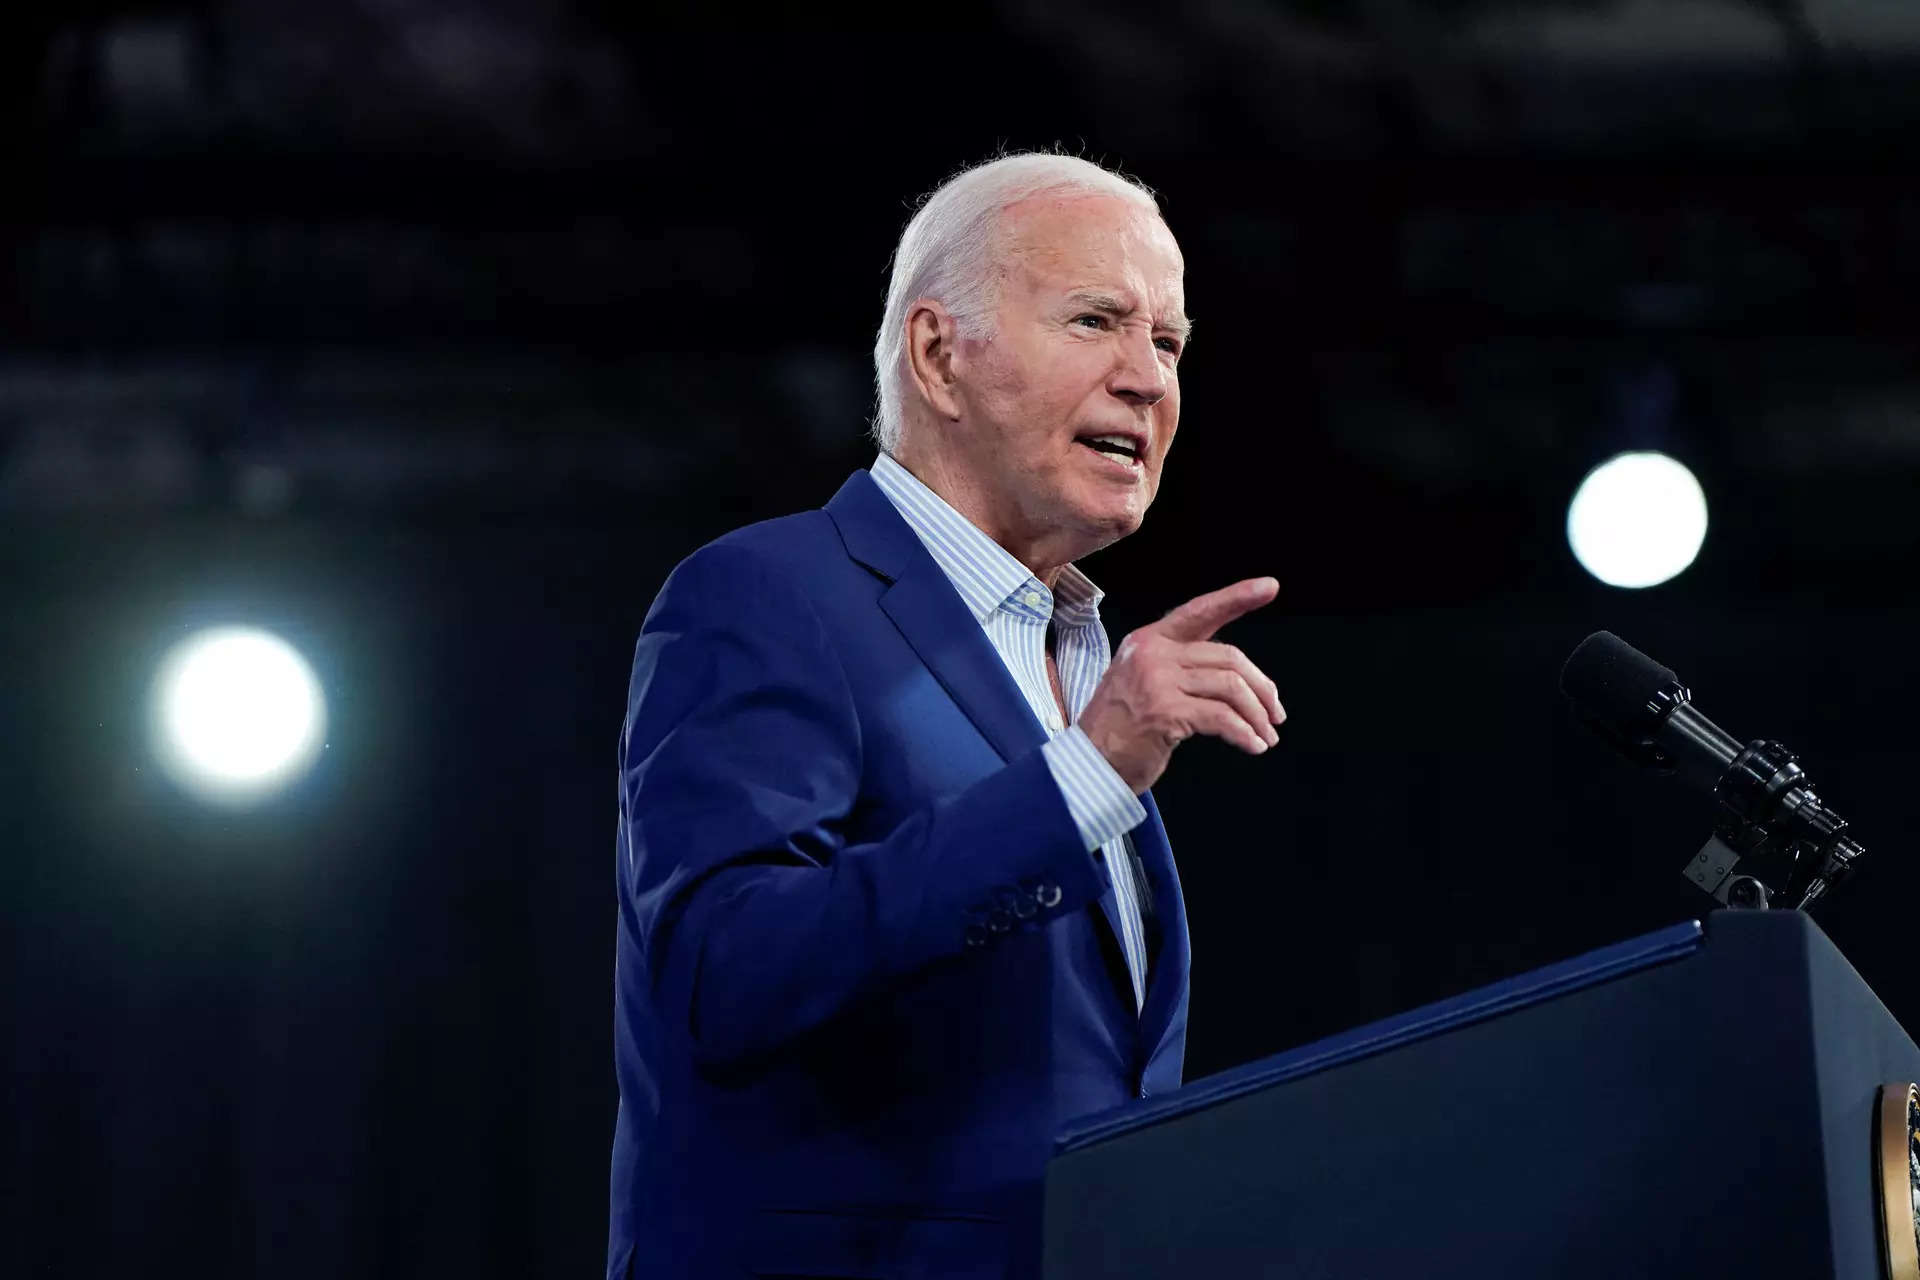 Joe Biden rejects growing pressure to abandon his campaign, vows to stay 'to the end' 